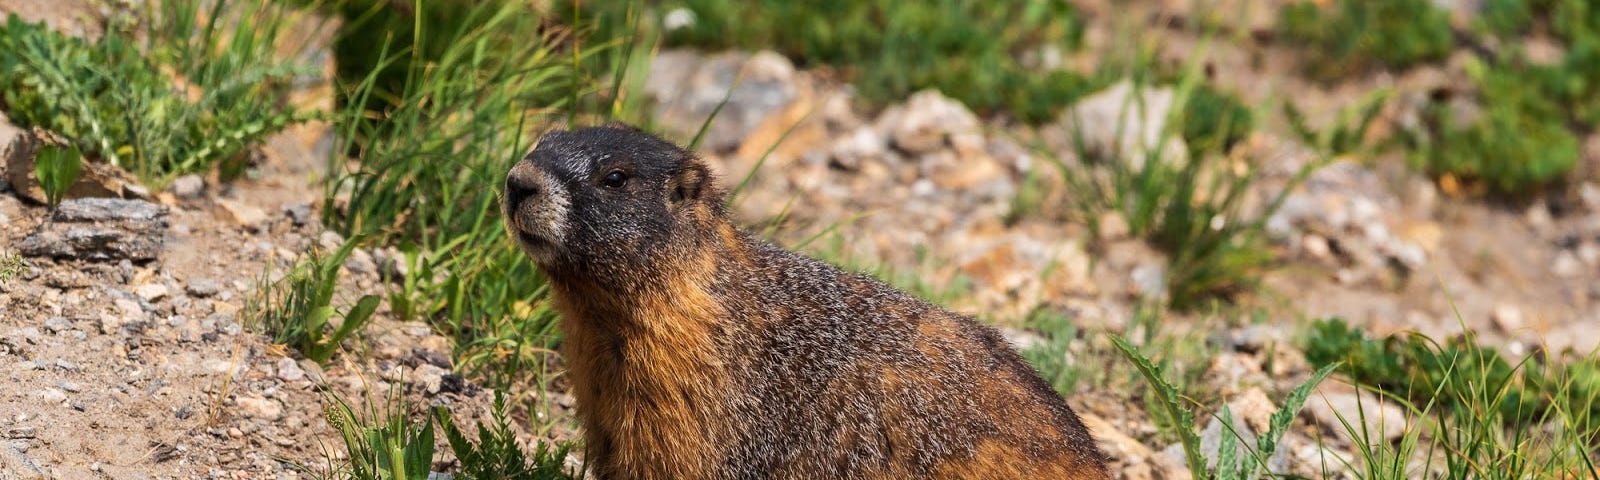 A yellow-bellied marmot seems to pose for a portrait.